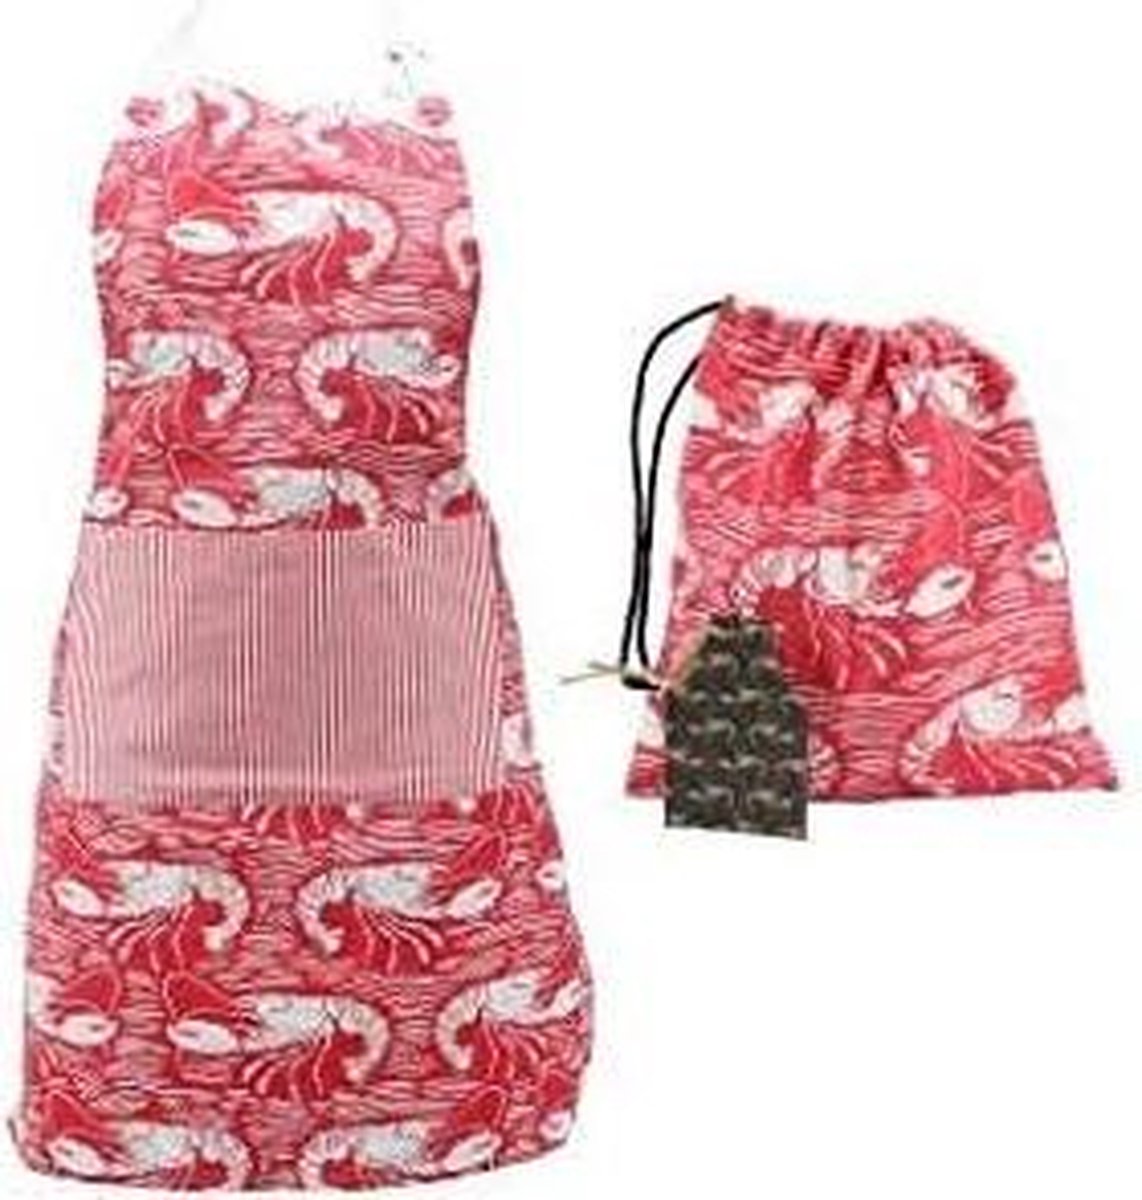 CGB Giftware Harbour Red Lobster Apron with Gift Bag | From CGB Giftware's Harbour Collection | Apron | Cooking | Kitchen